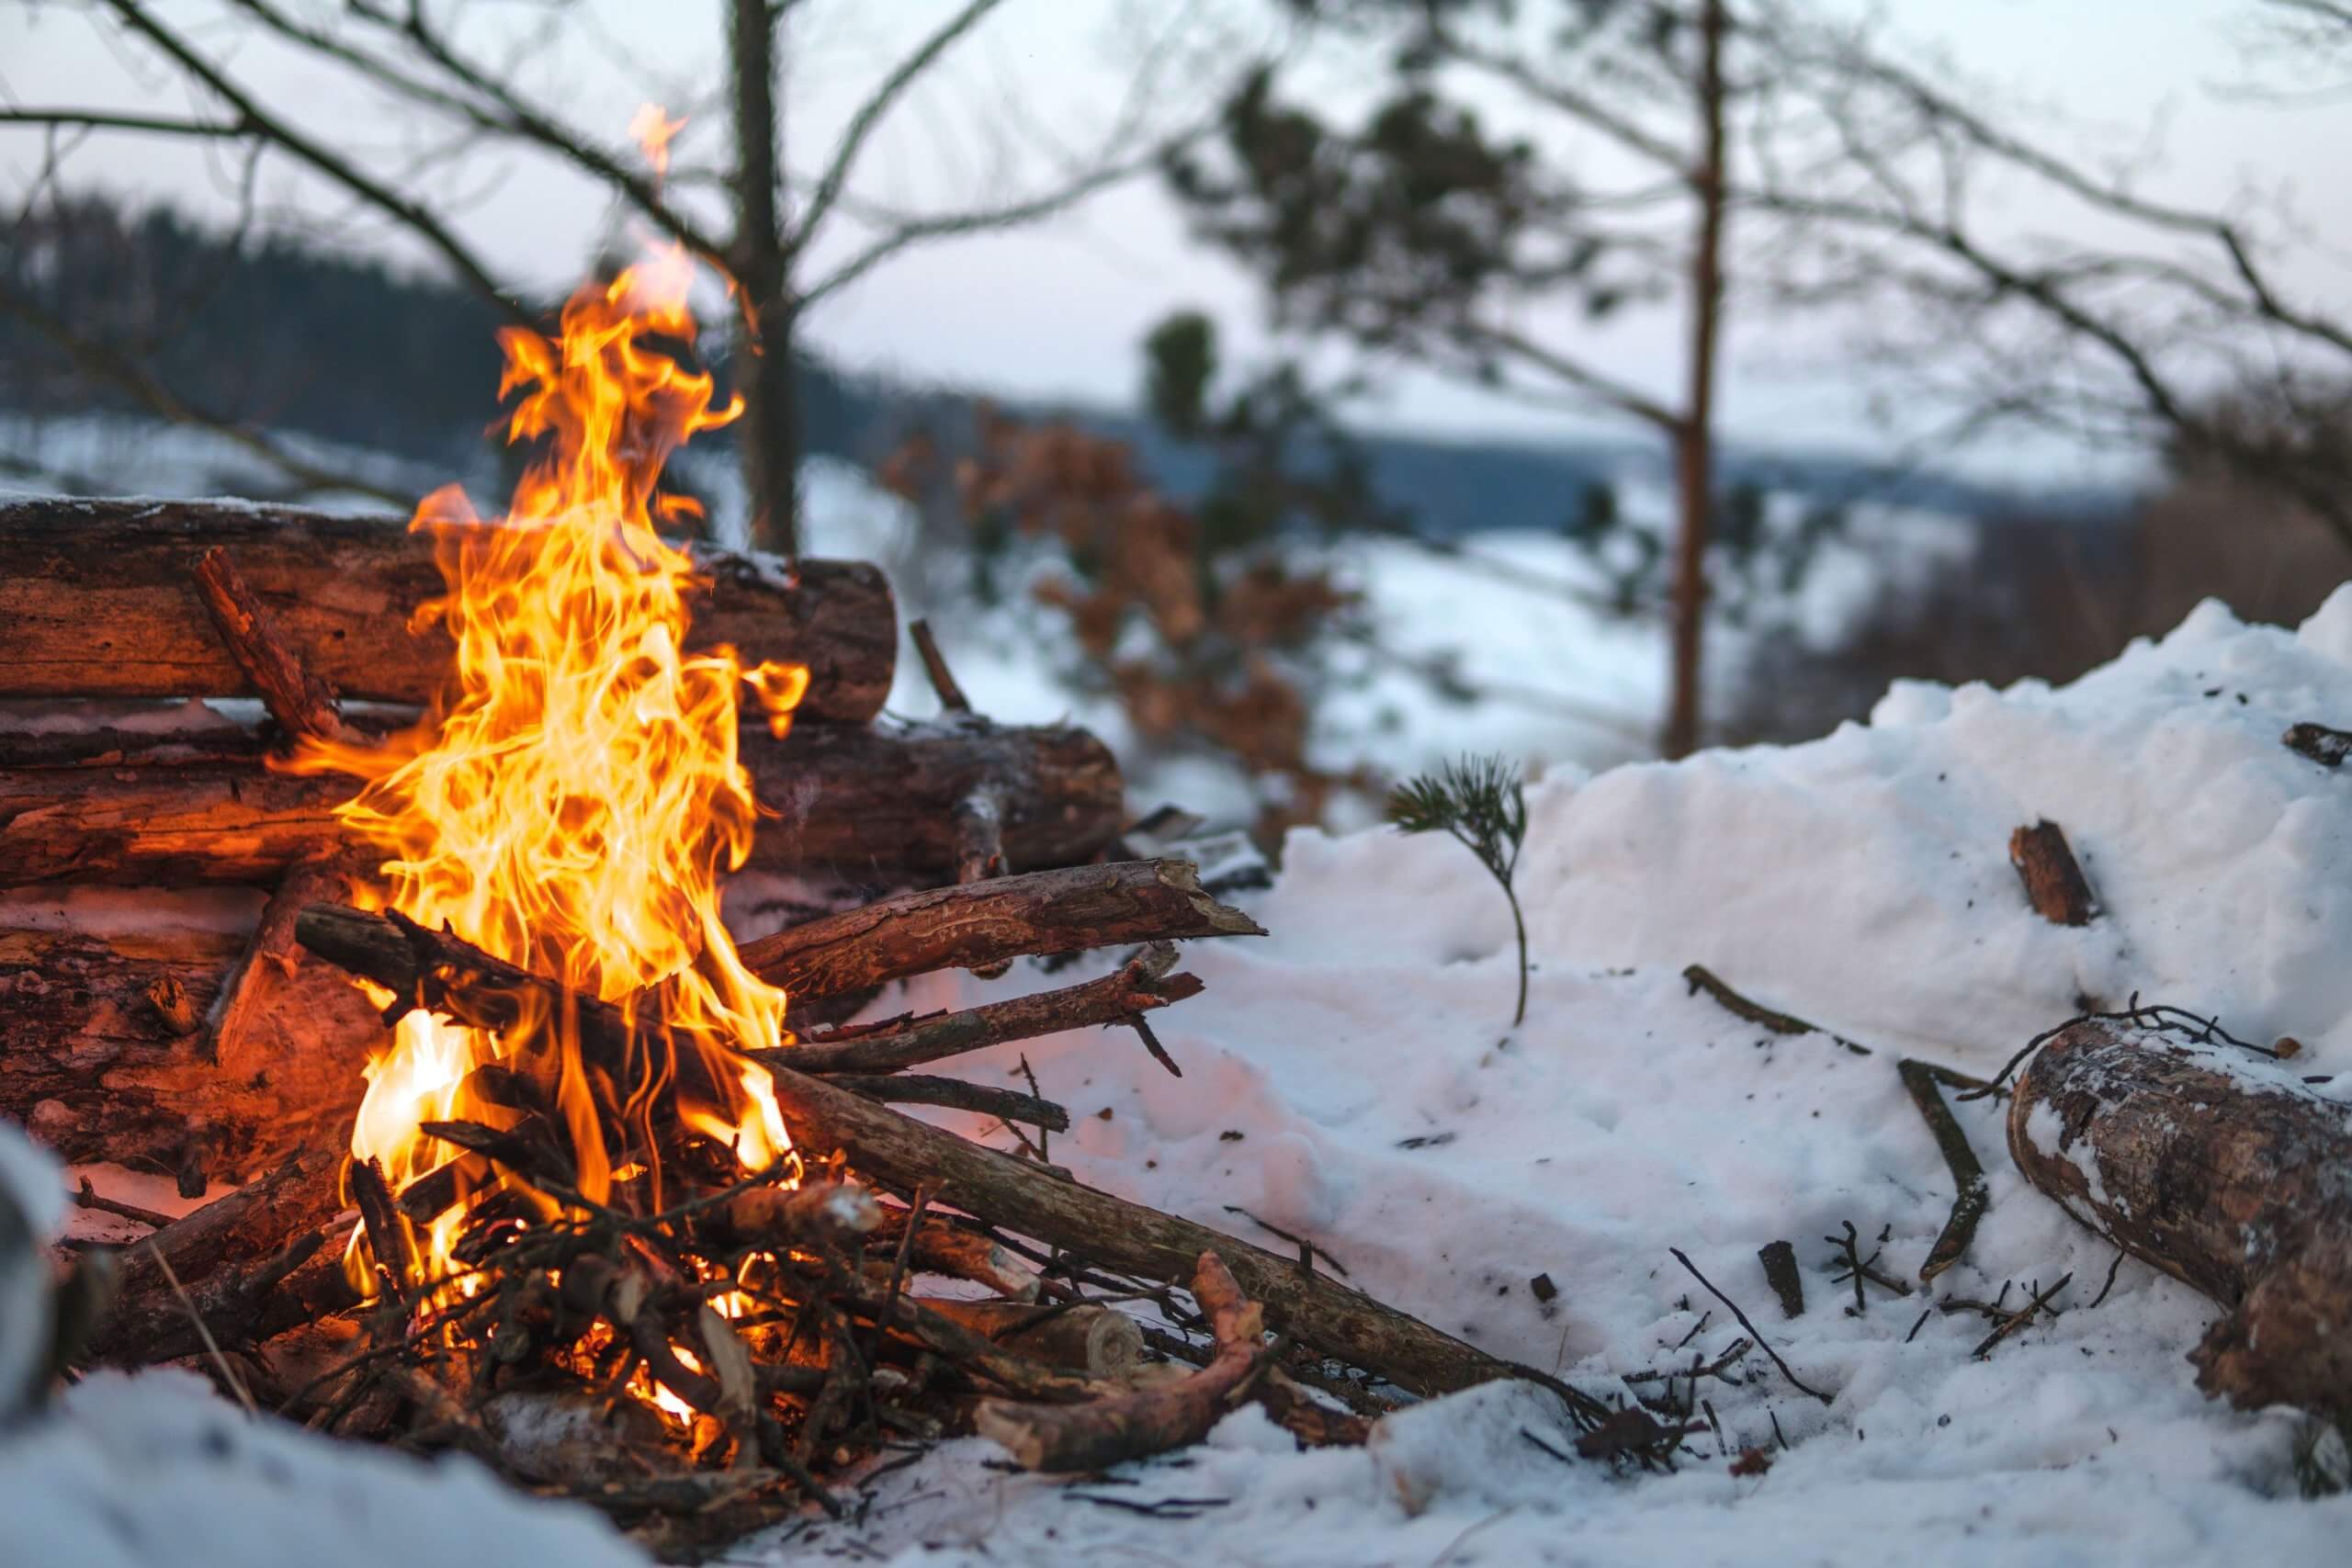 Staying Warm This Winter - How to Deal Without the Heating